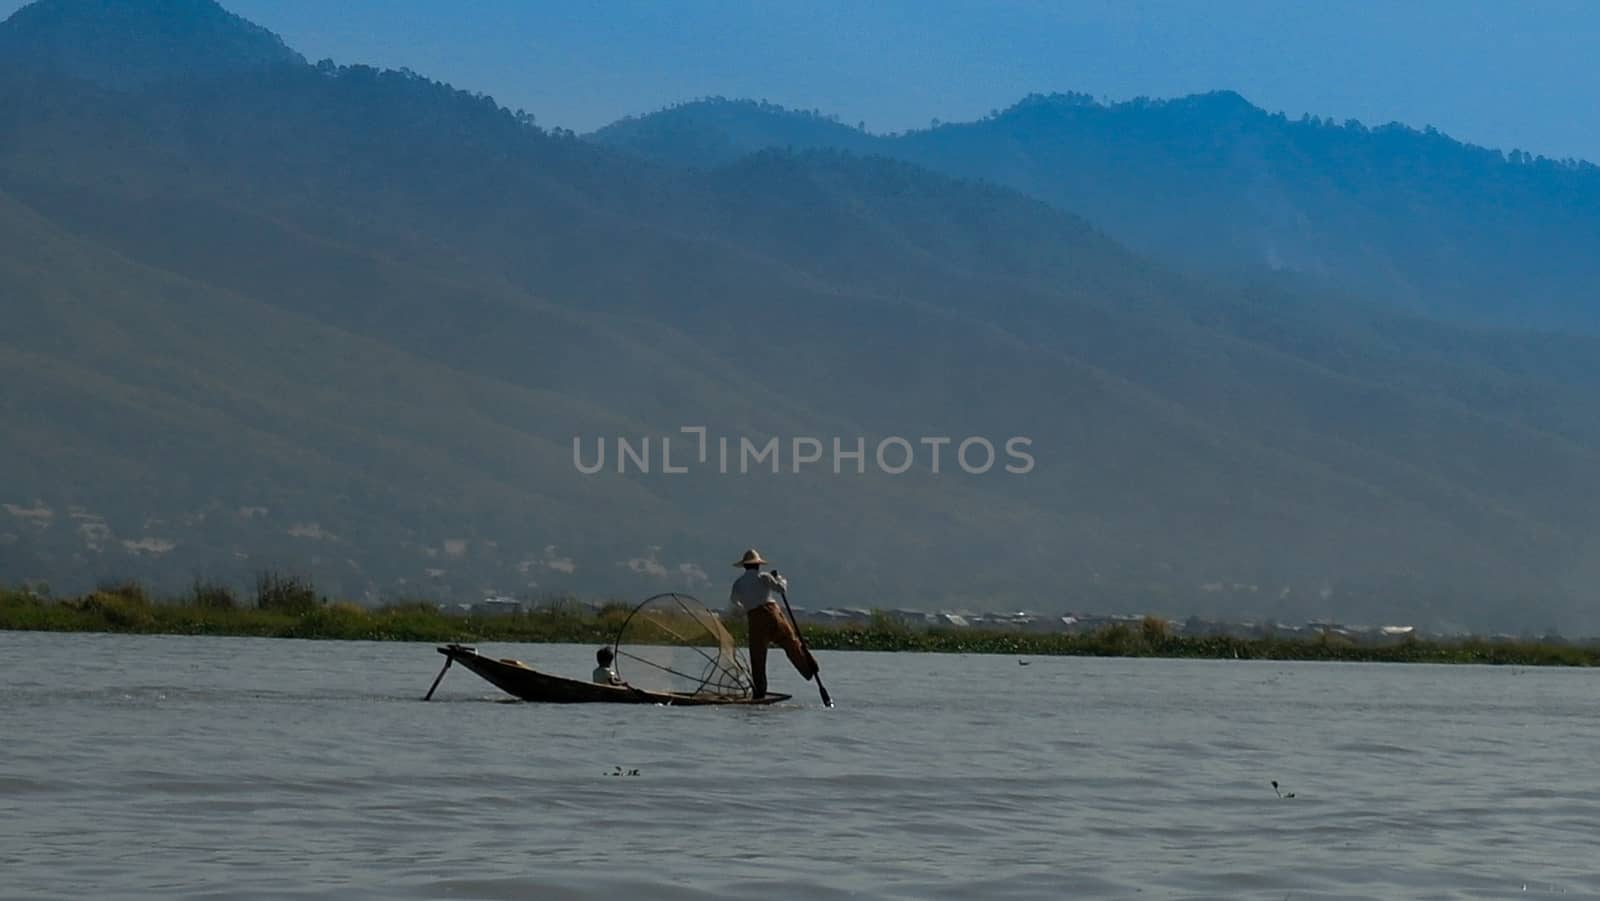 Fisherman on the boat at the sunrise, Inle lake Myanmar by homocosmicos